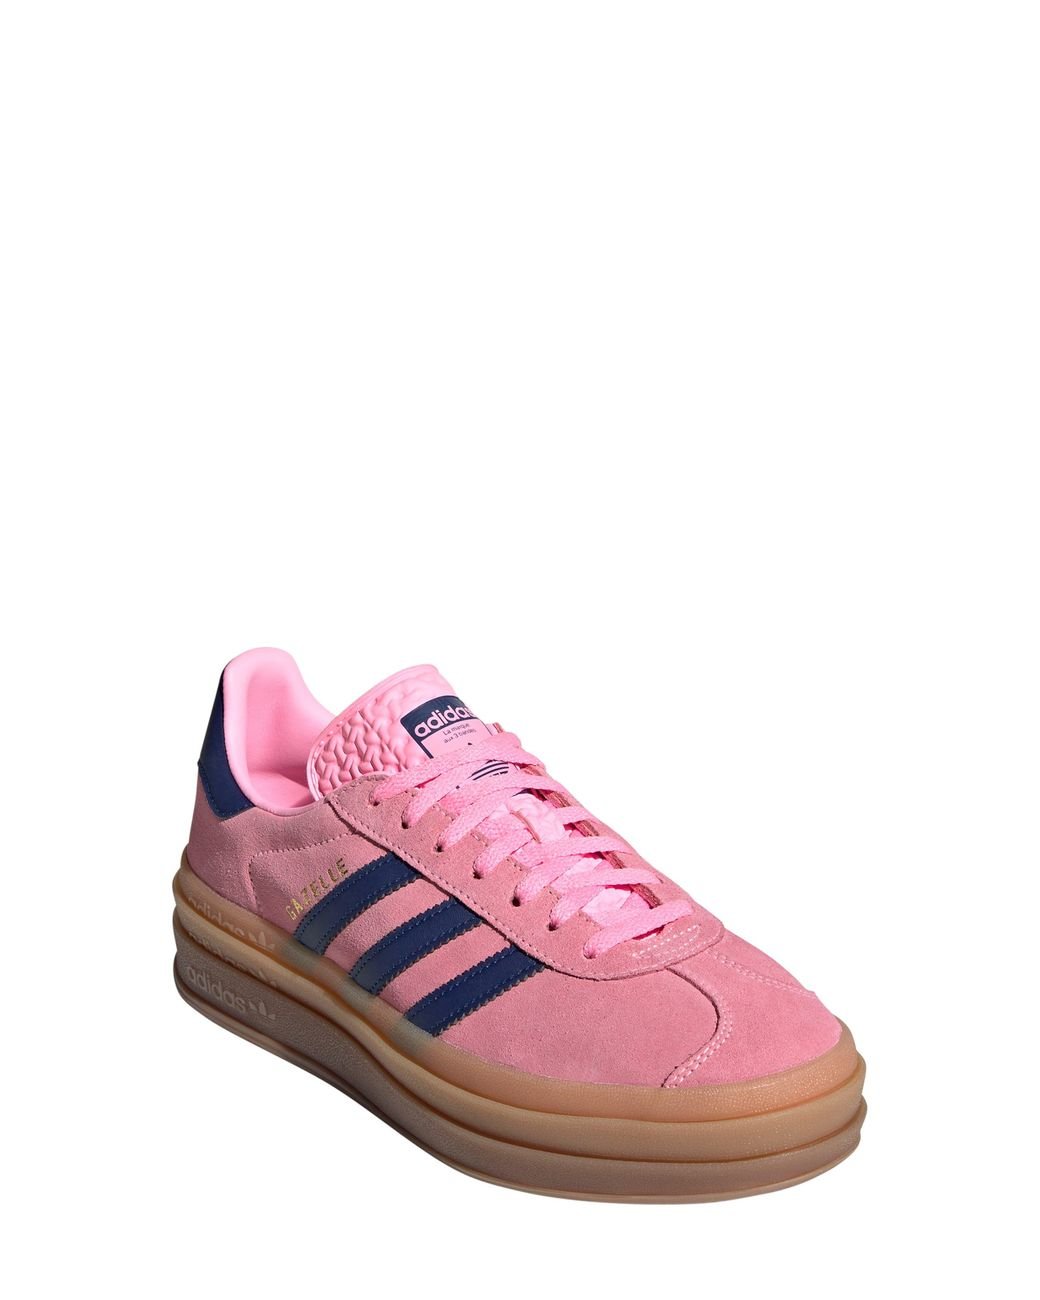 count Absay length adidas Gazelle Bold Platform Sneaker in Pink | Lyst